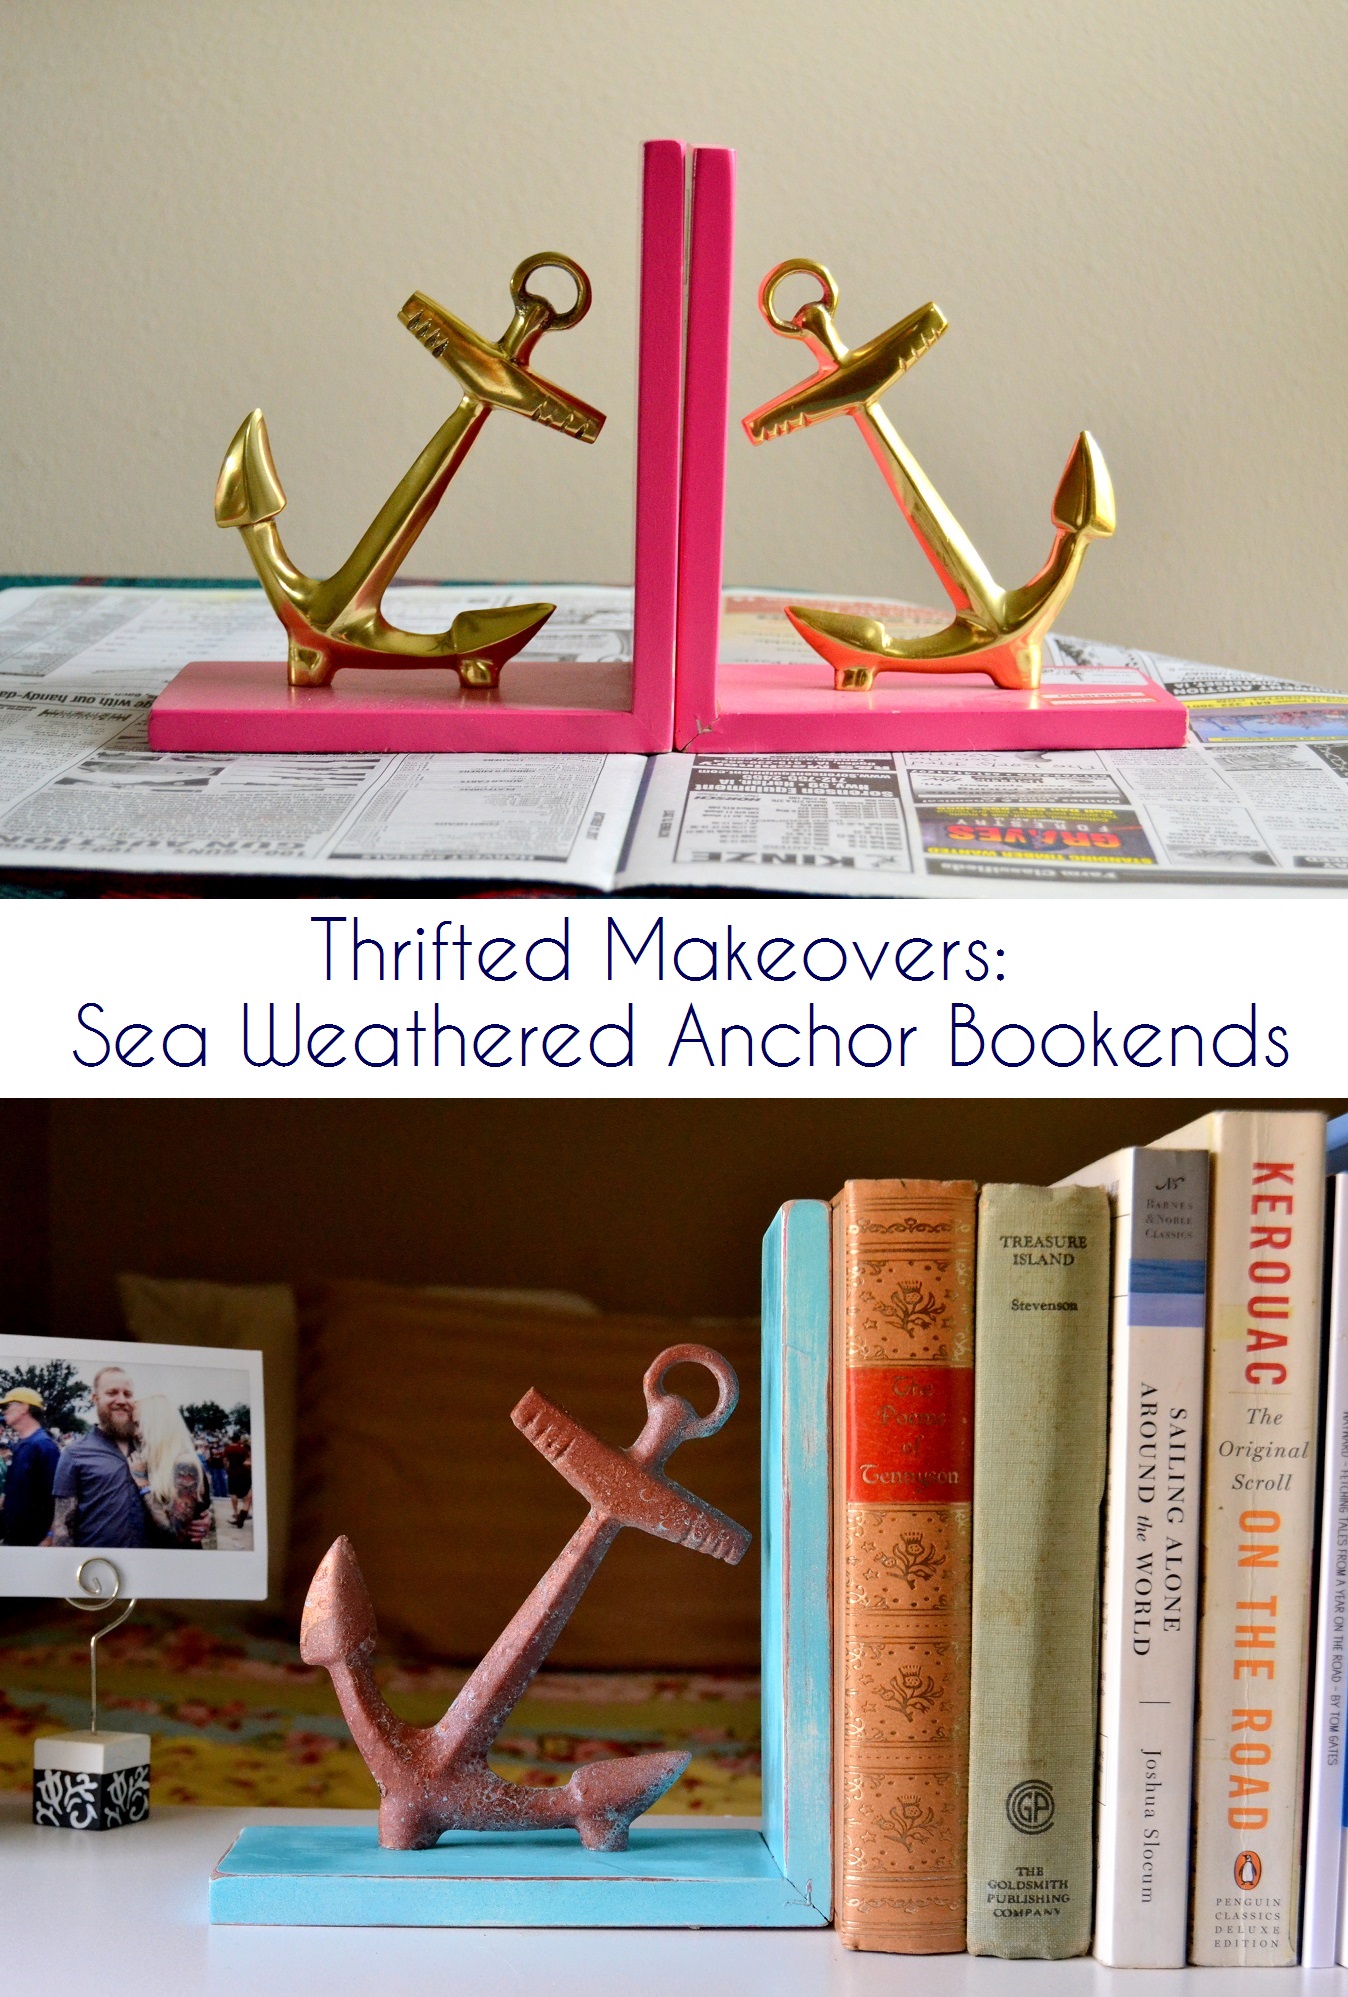 Thrifted Makeovers: Sea Weathered Anchor Bookends